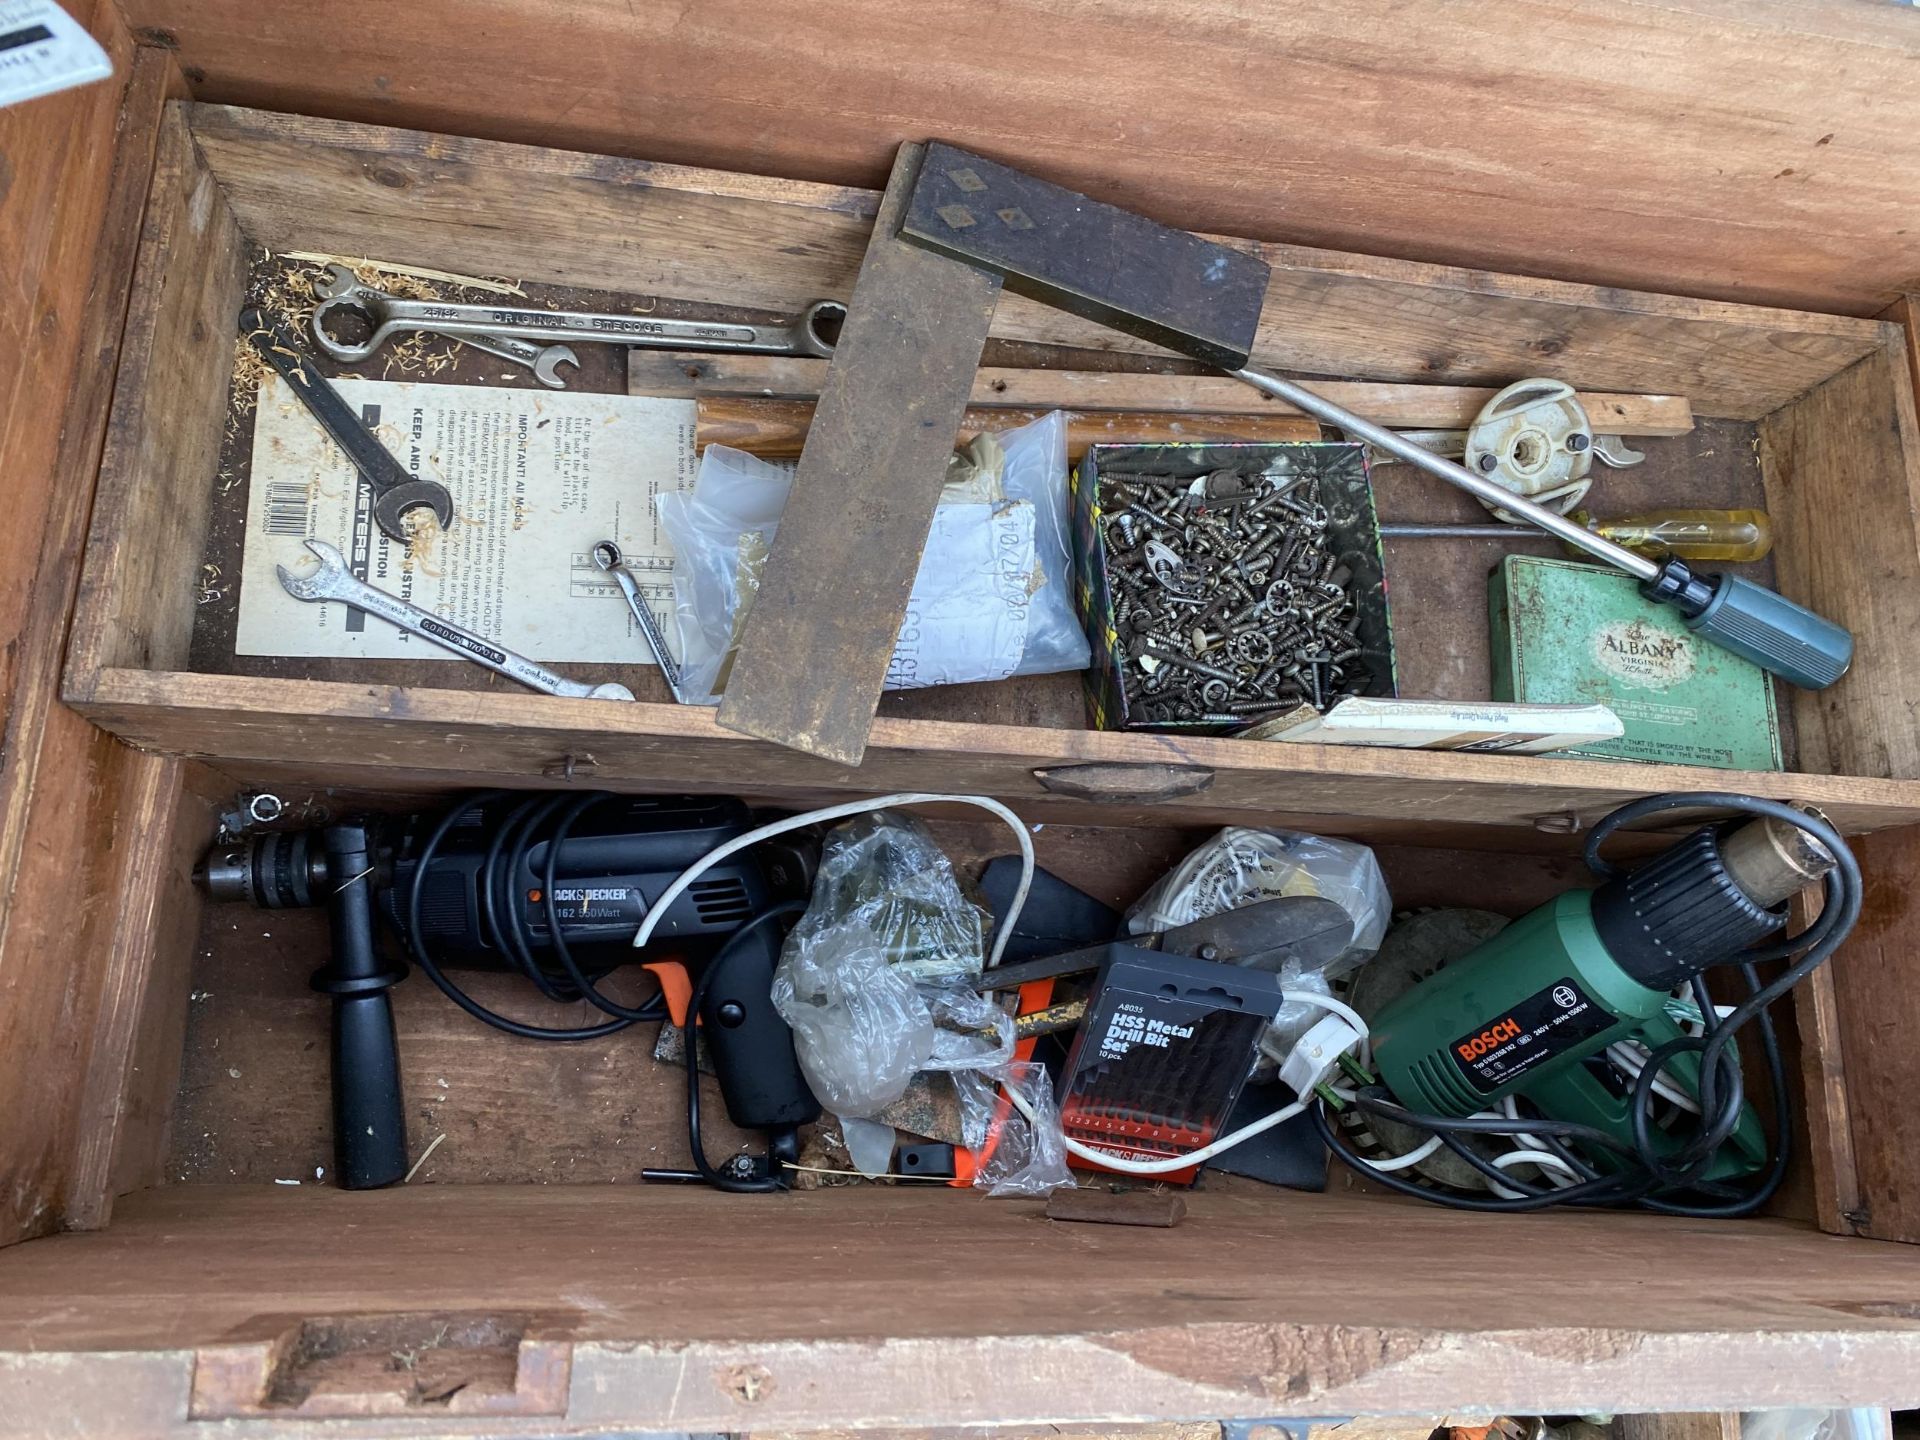 A LARGE VINTAGE ENGINEERS CHEST CONTAINING A LARGE ASSORTMENT OF TOOLS - Image 7 of 9